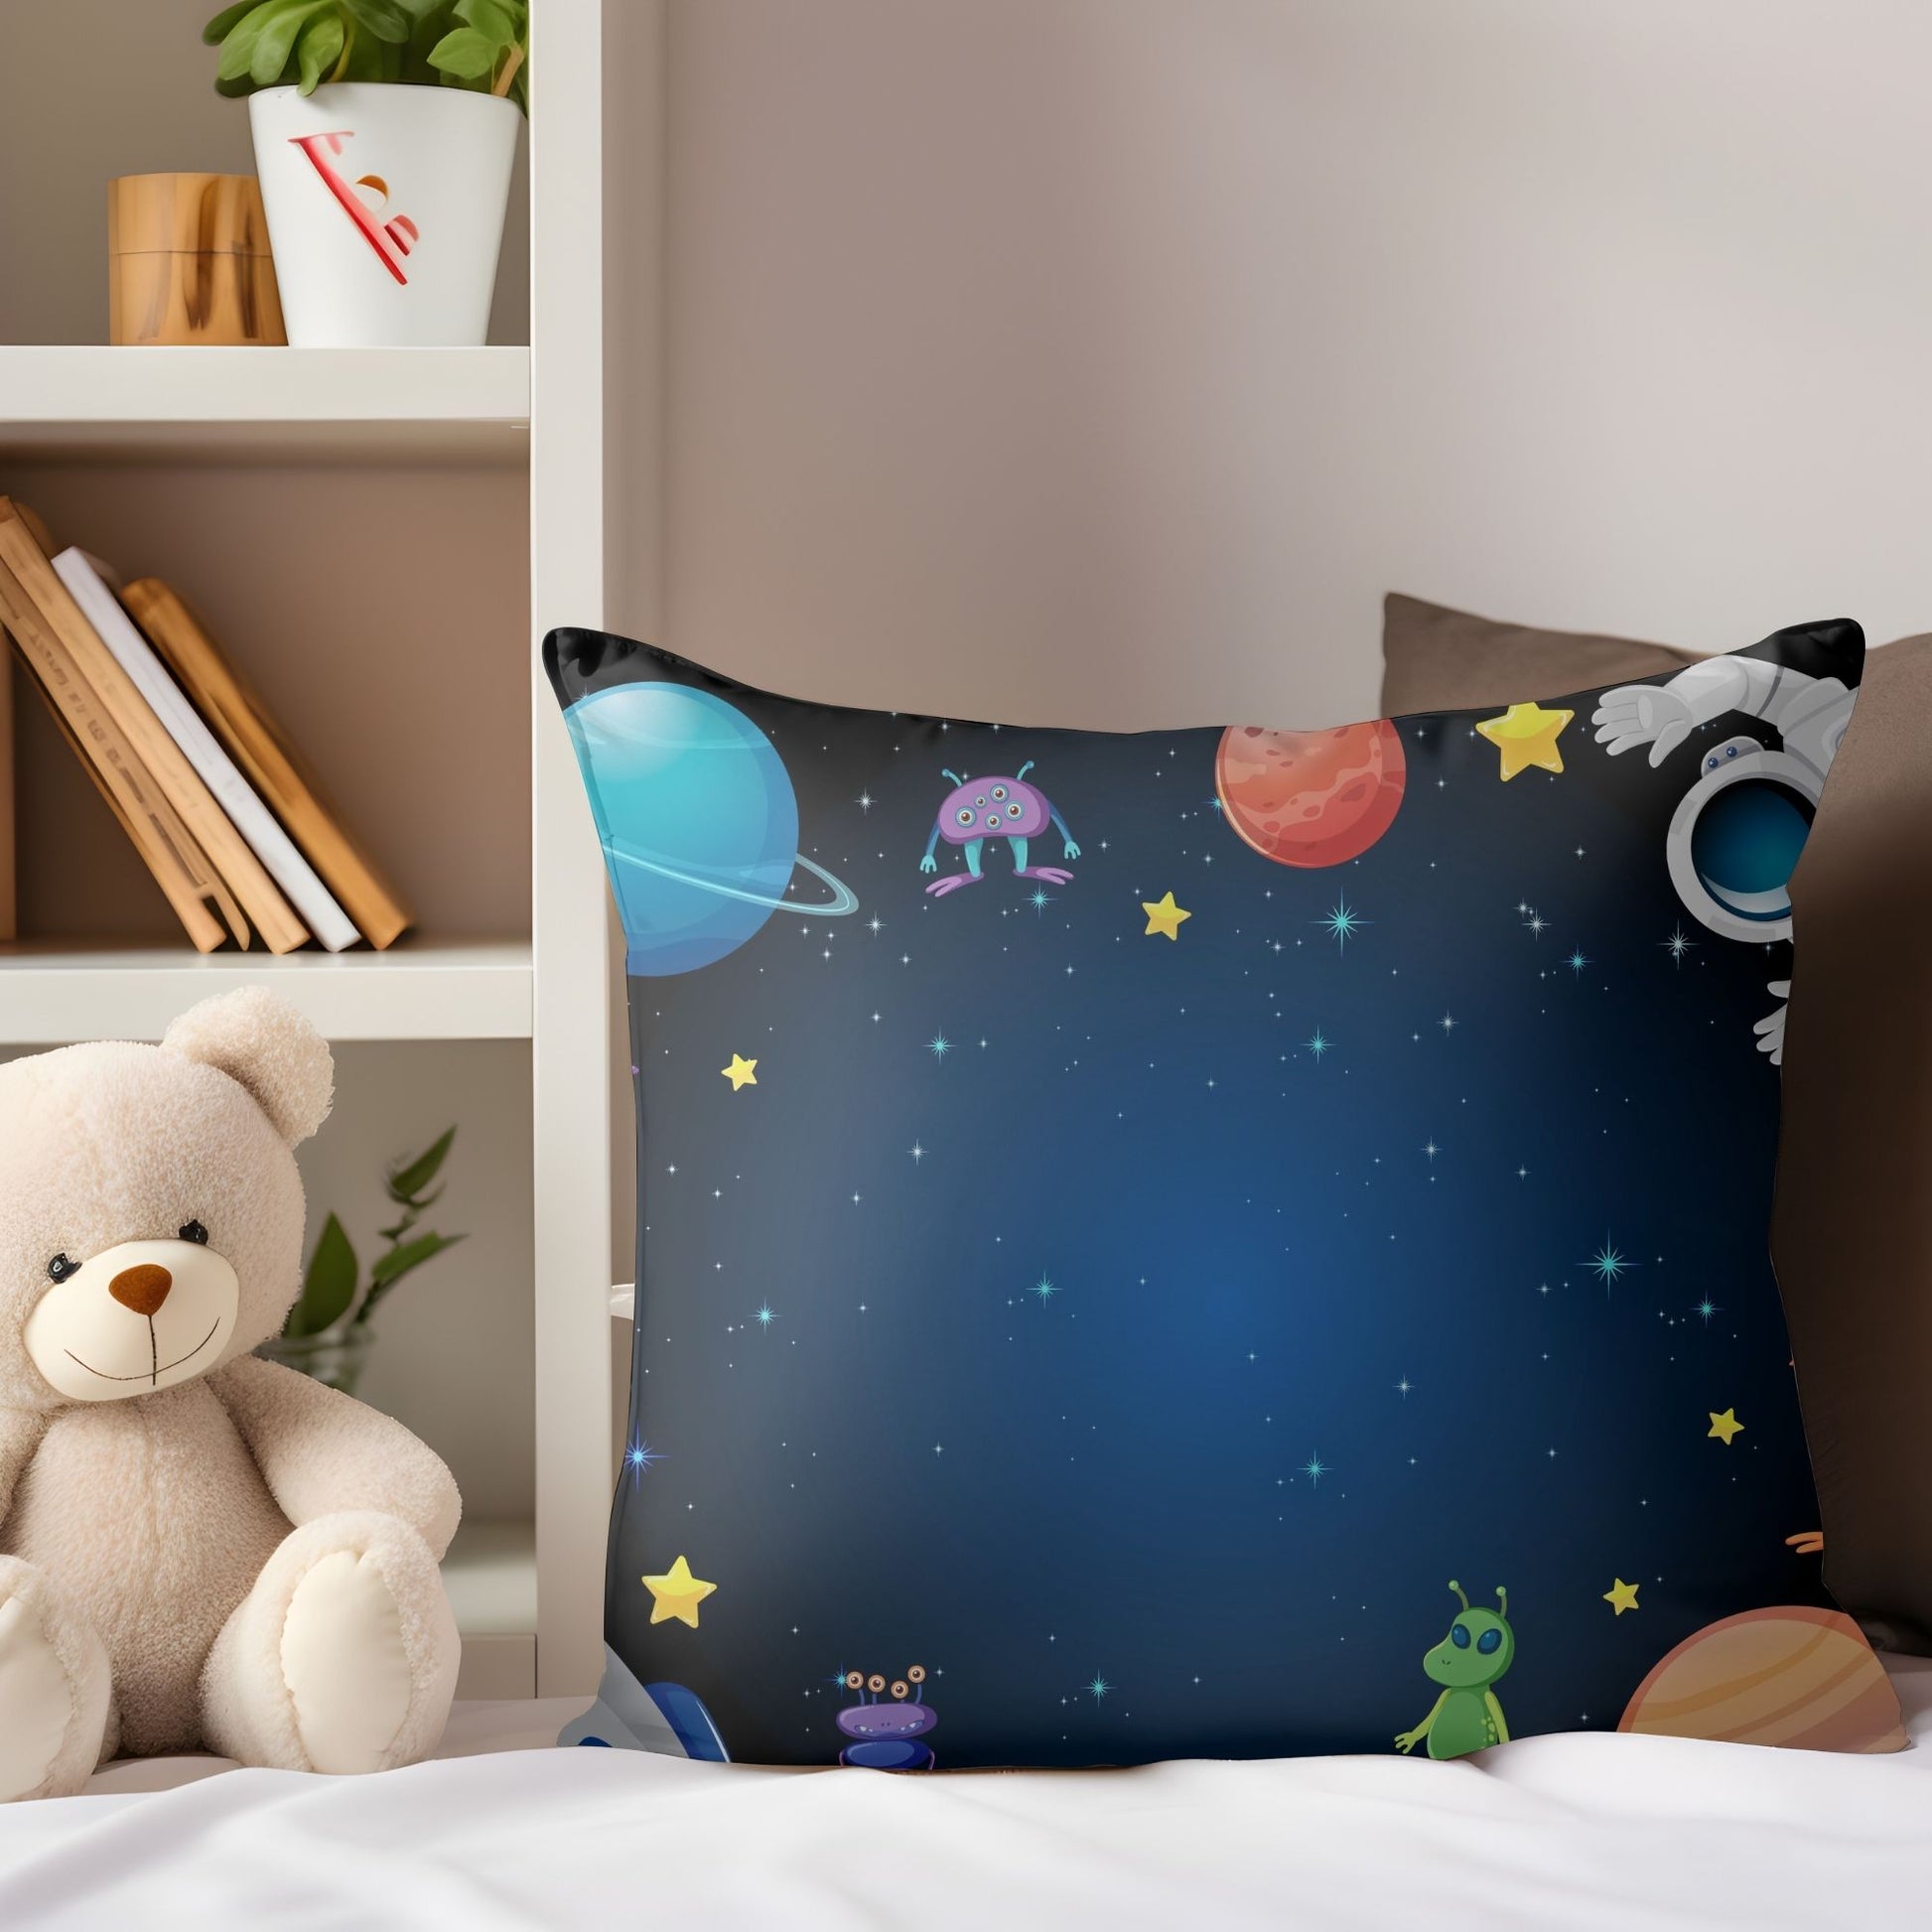 Soft pillow adorned with adorable aliens pattern for children's rooms.